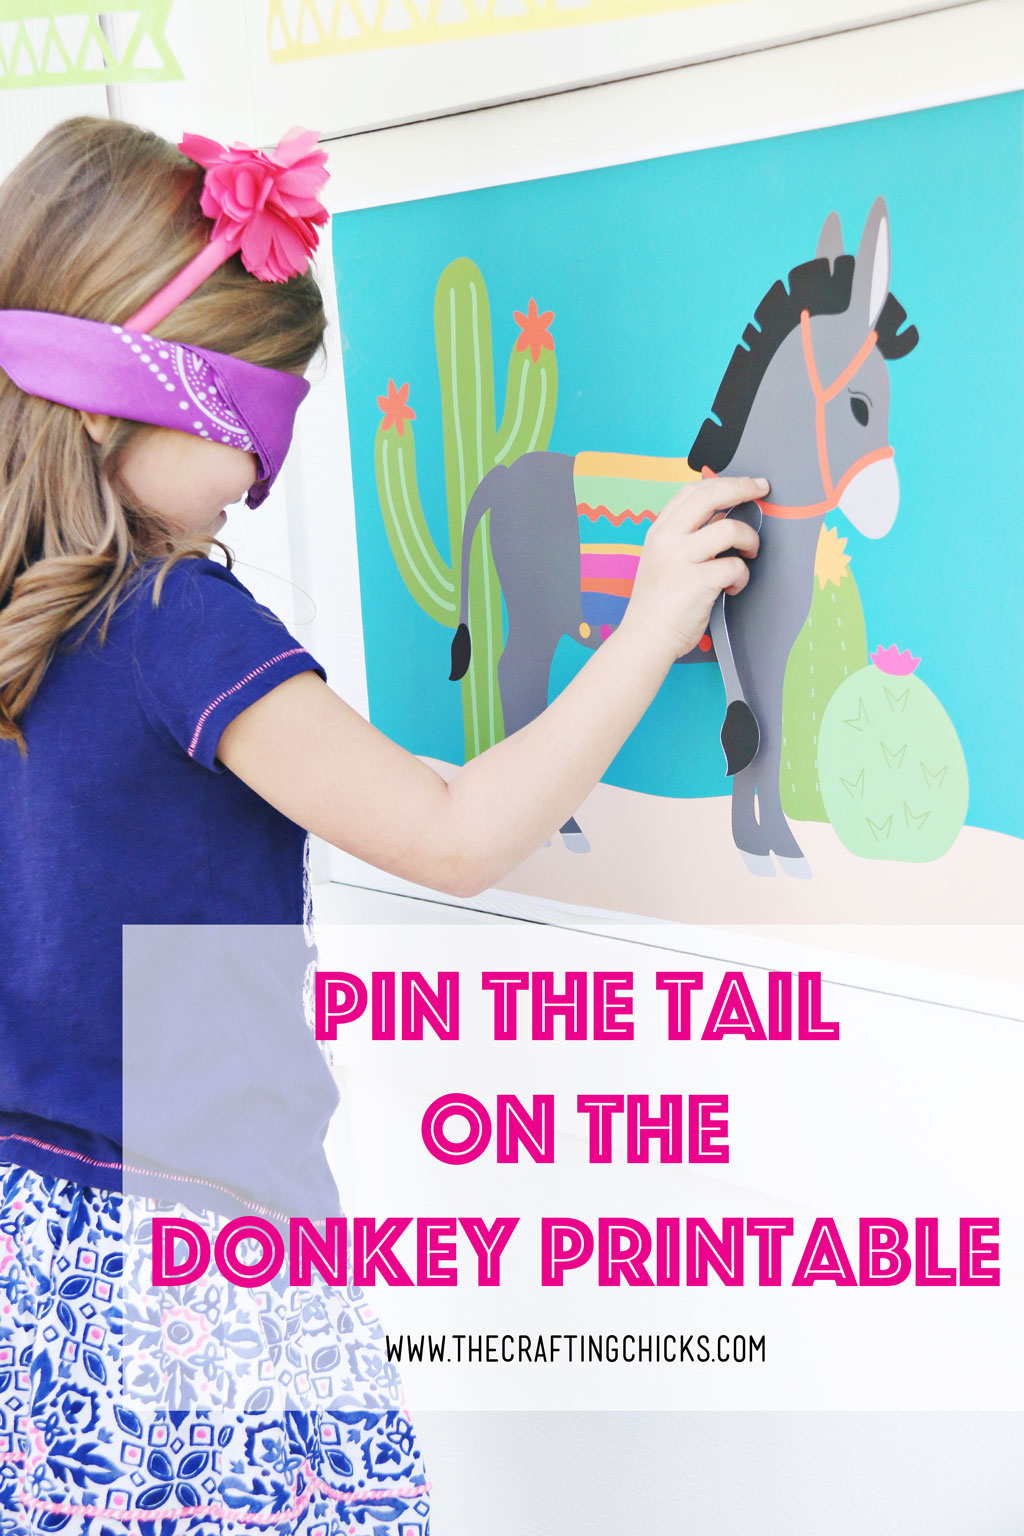 Pin The Tail On The Donkey - The Crafting Chicks - Pin The Tail On The Donkey Printable Free